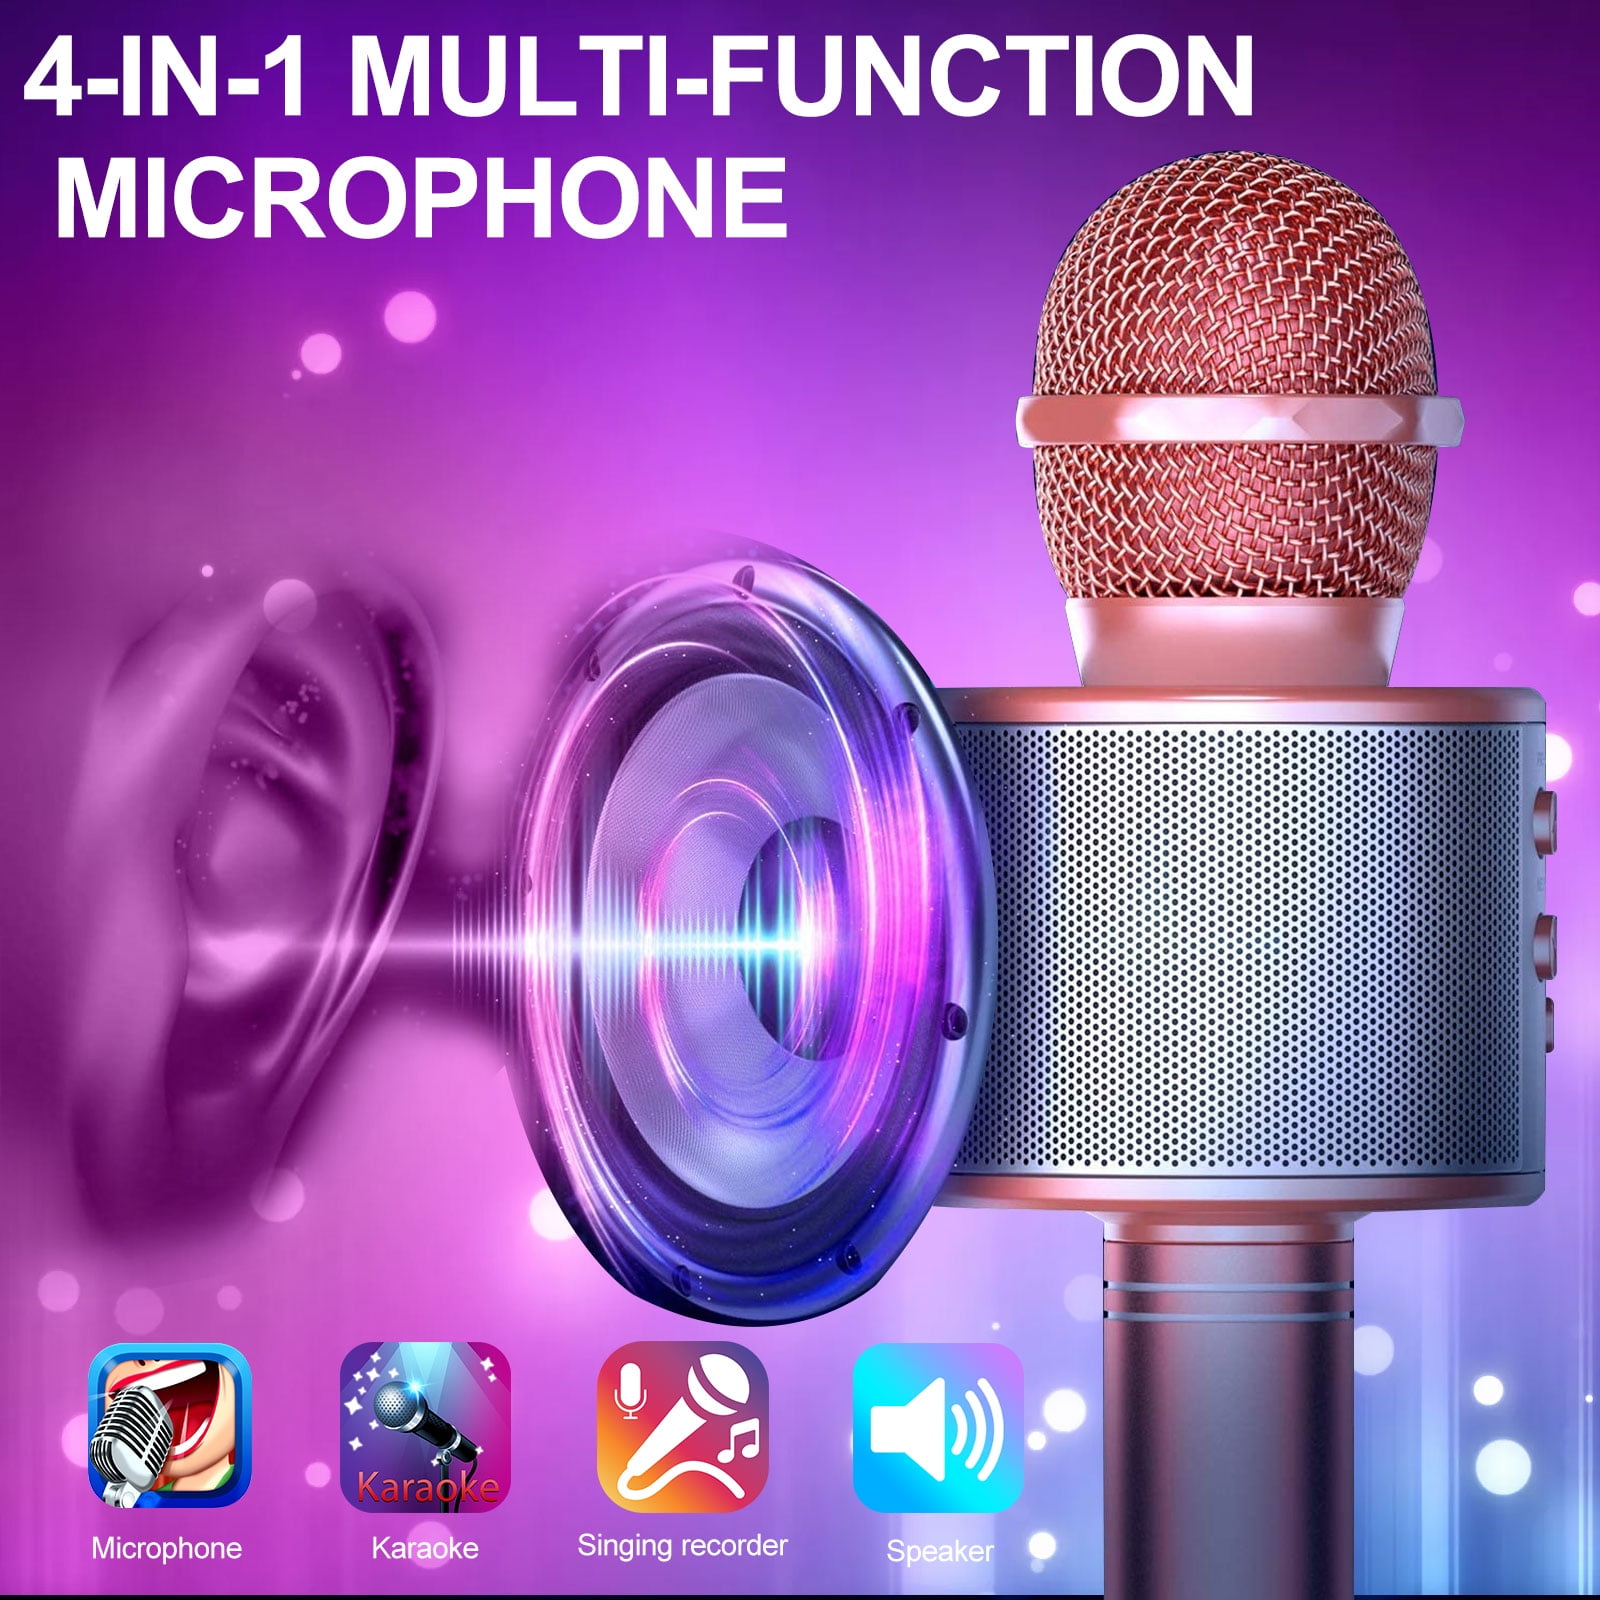 Wireless Karaoke Microphone Portable for Home KTV/Outdoor Party/Singing/Recording,Compatible with iPhone/Android/iPad/PC Voice Changer Bluetooth Karaoke Microphone，YKSINX 4-in-1 Speaker Recorder 